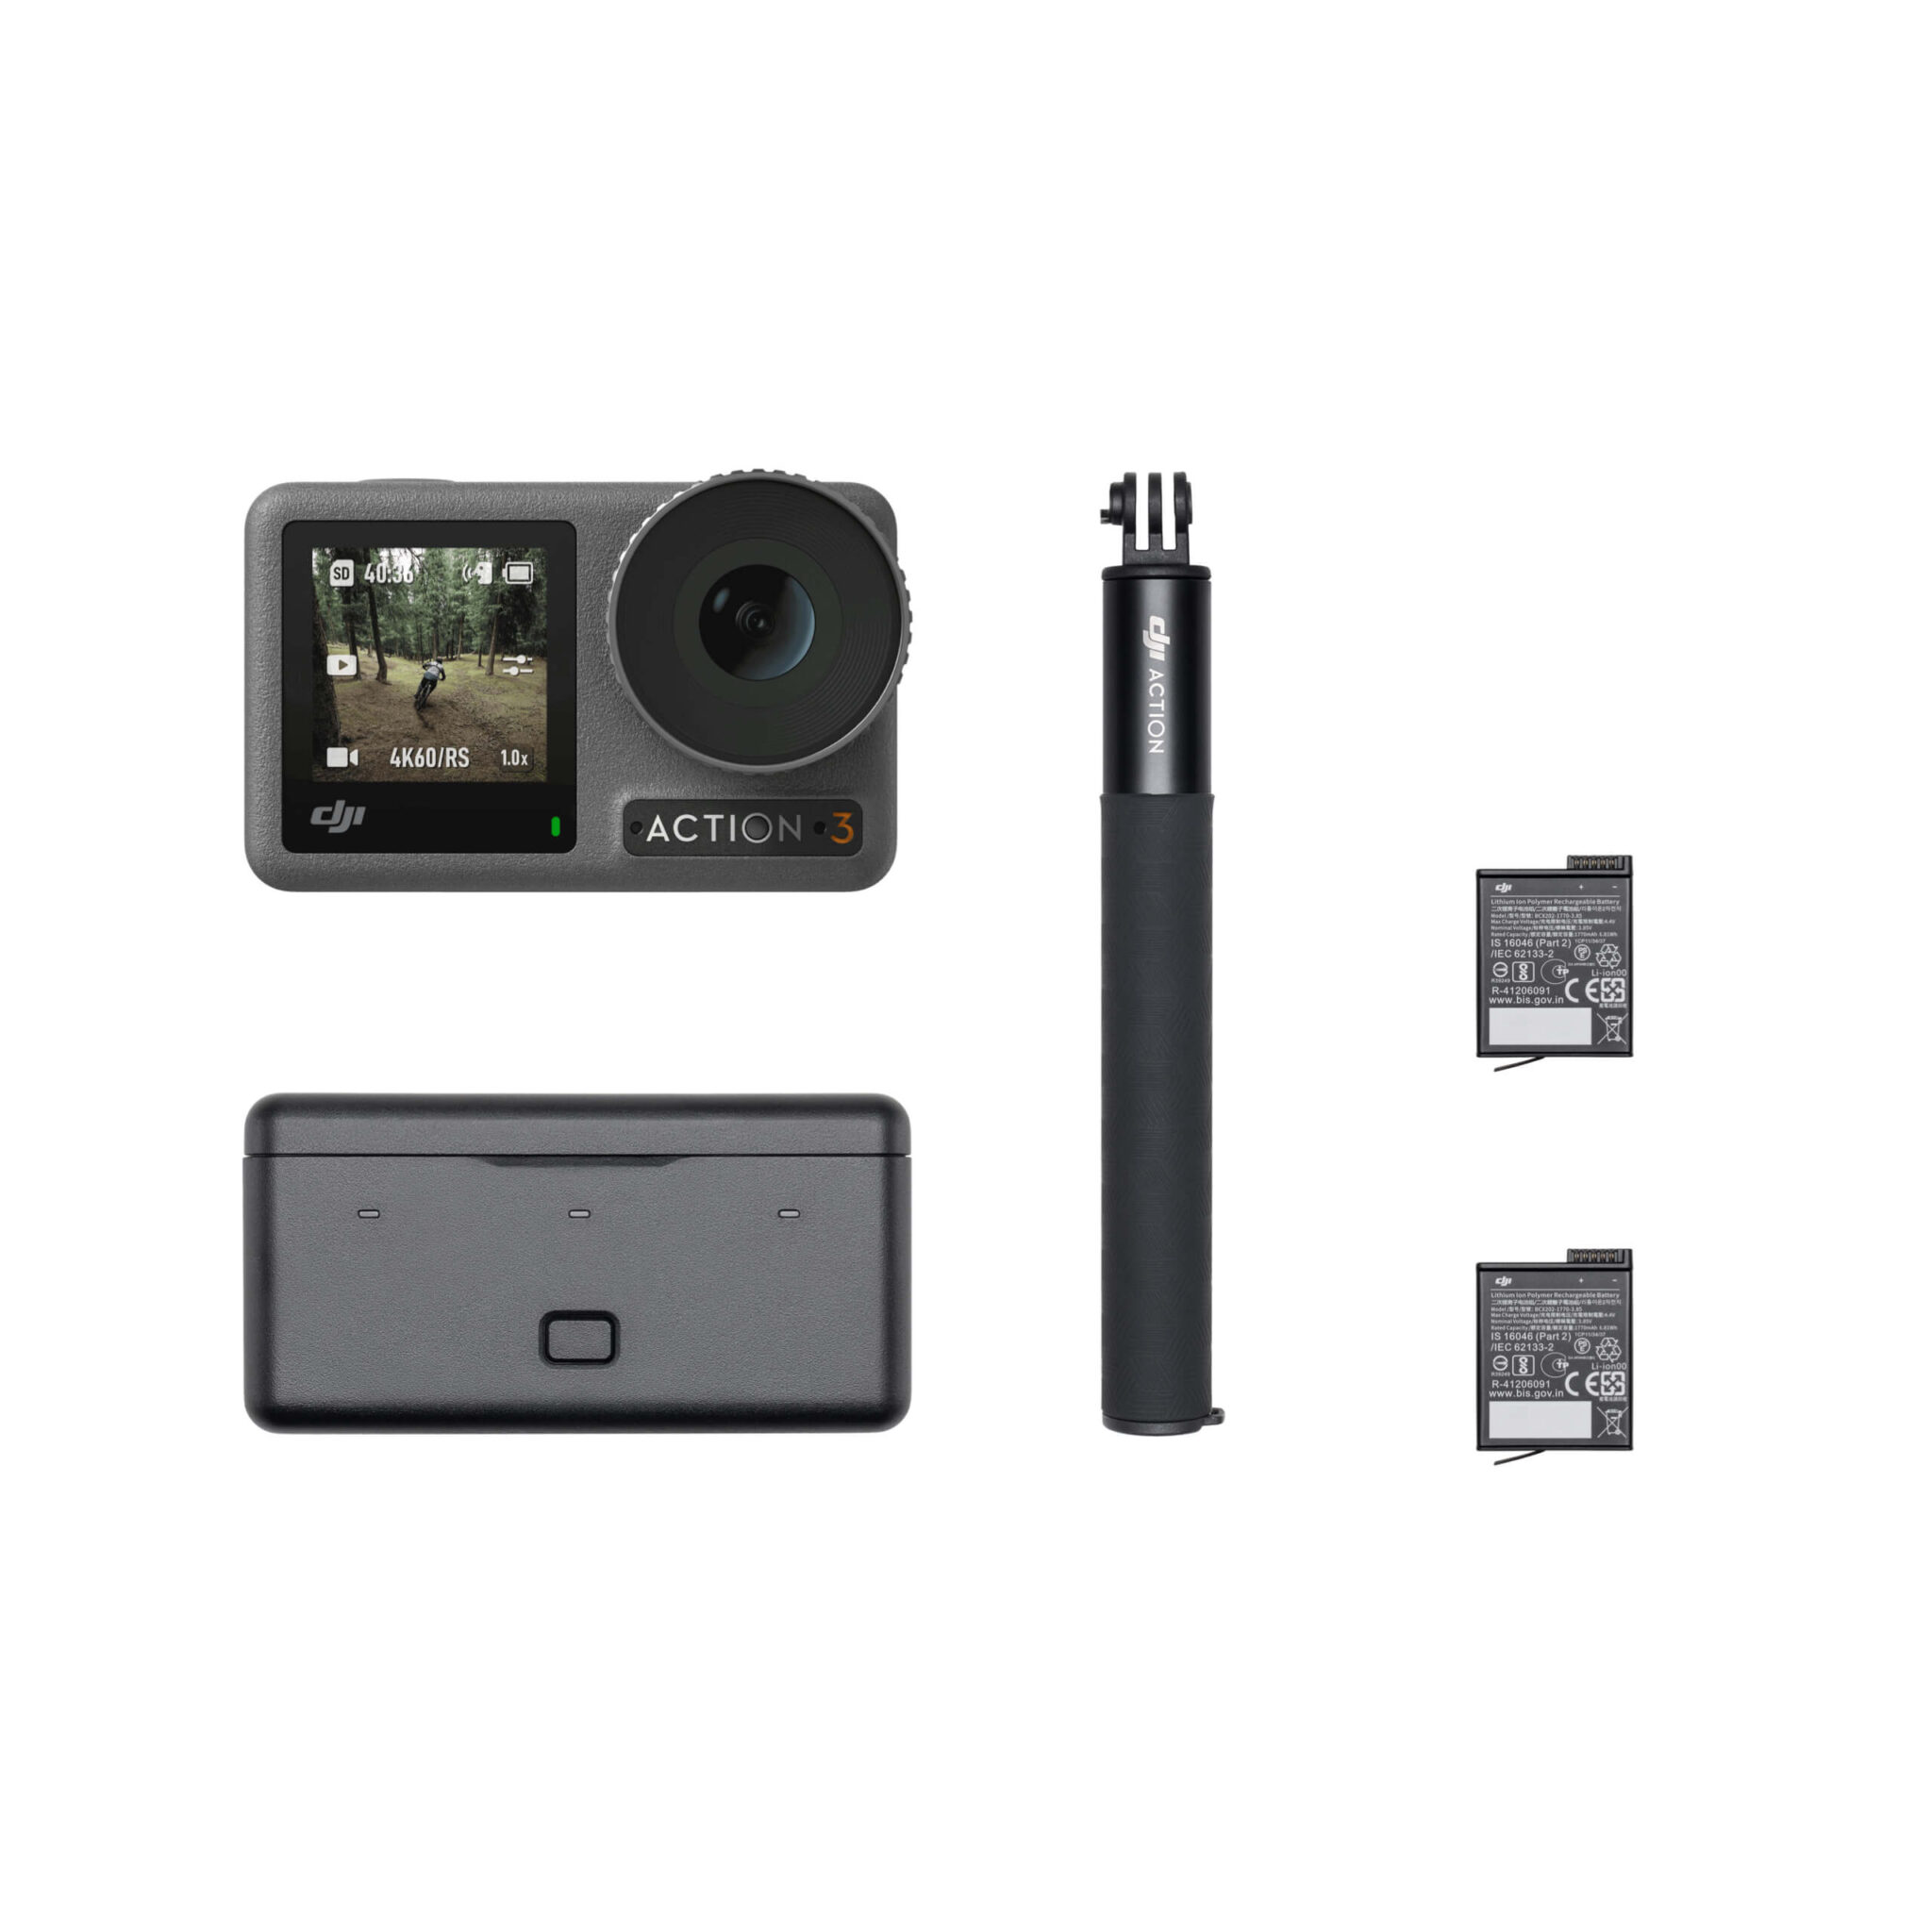 DJI releases new firmware update for Osmo Action 4 camera